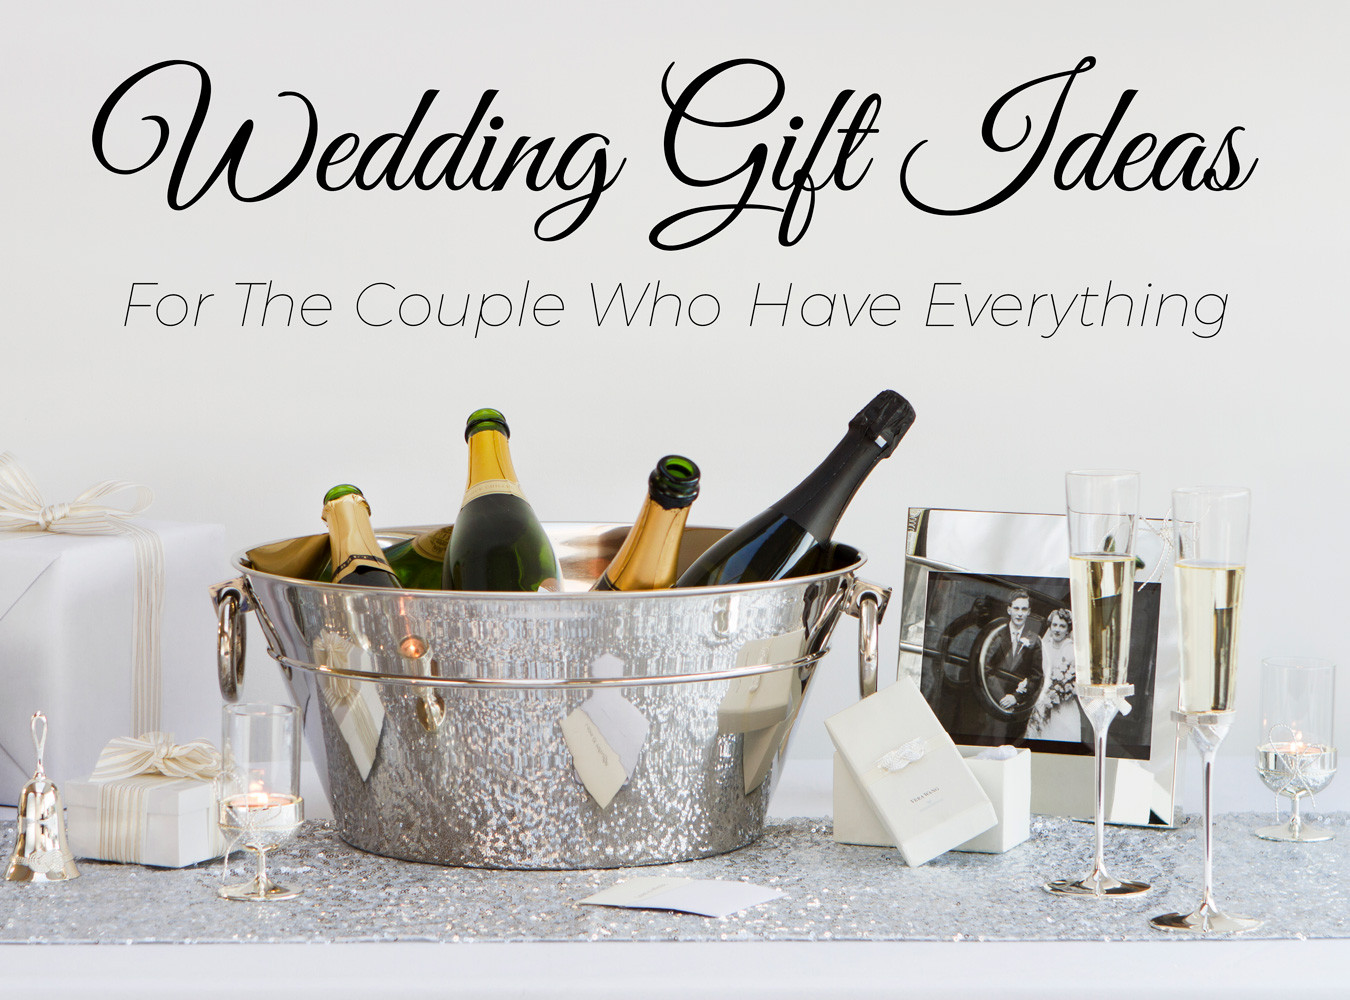 Wedding Gift Ideas For Couple Who Have Everything
 5 Wedding Gift Ideas for the Couple Who Have Everything